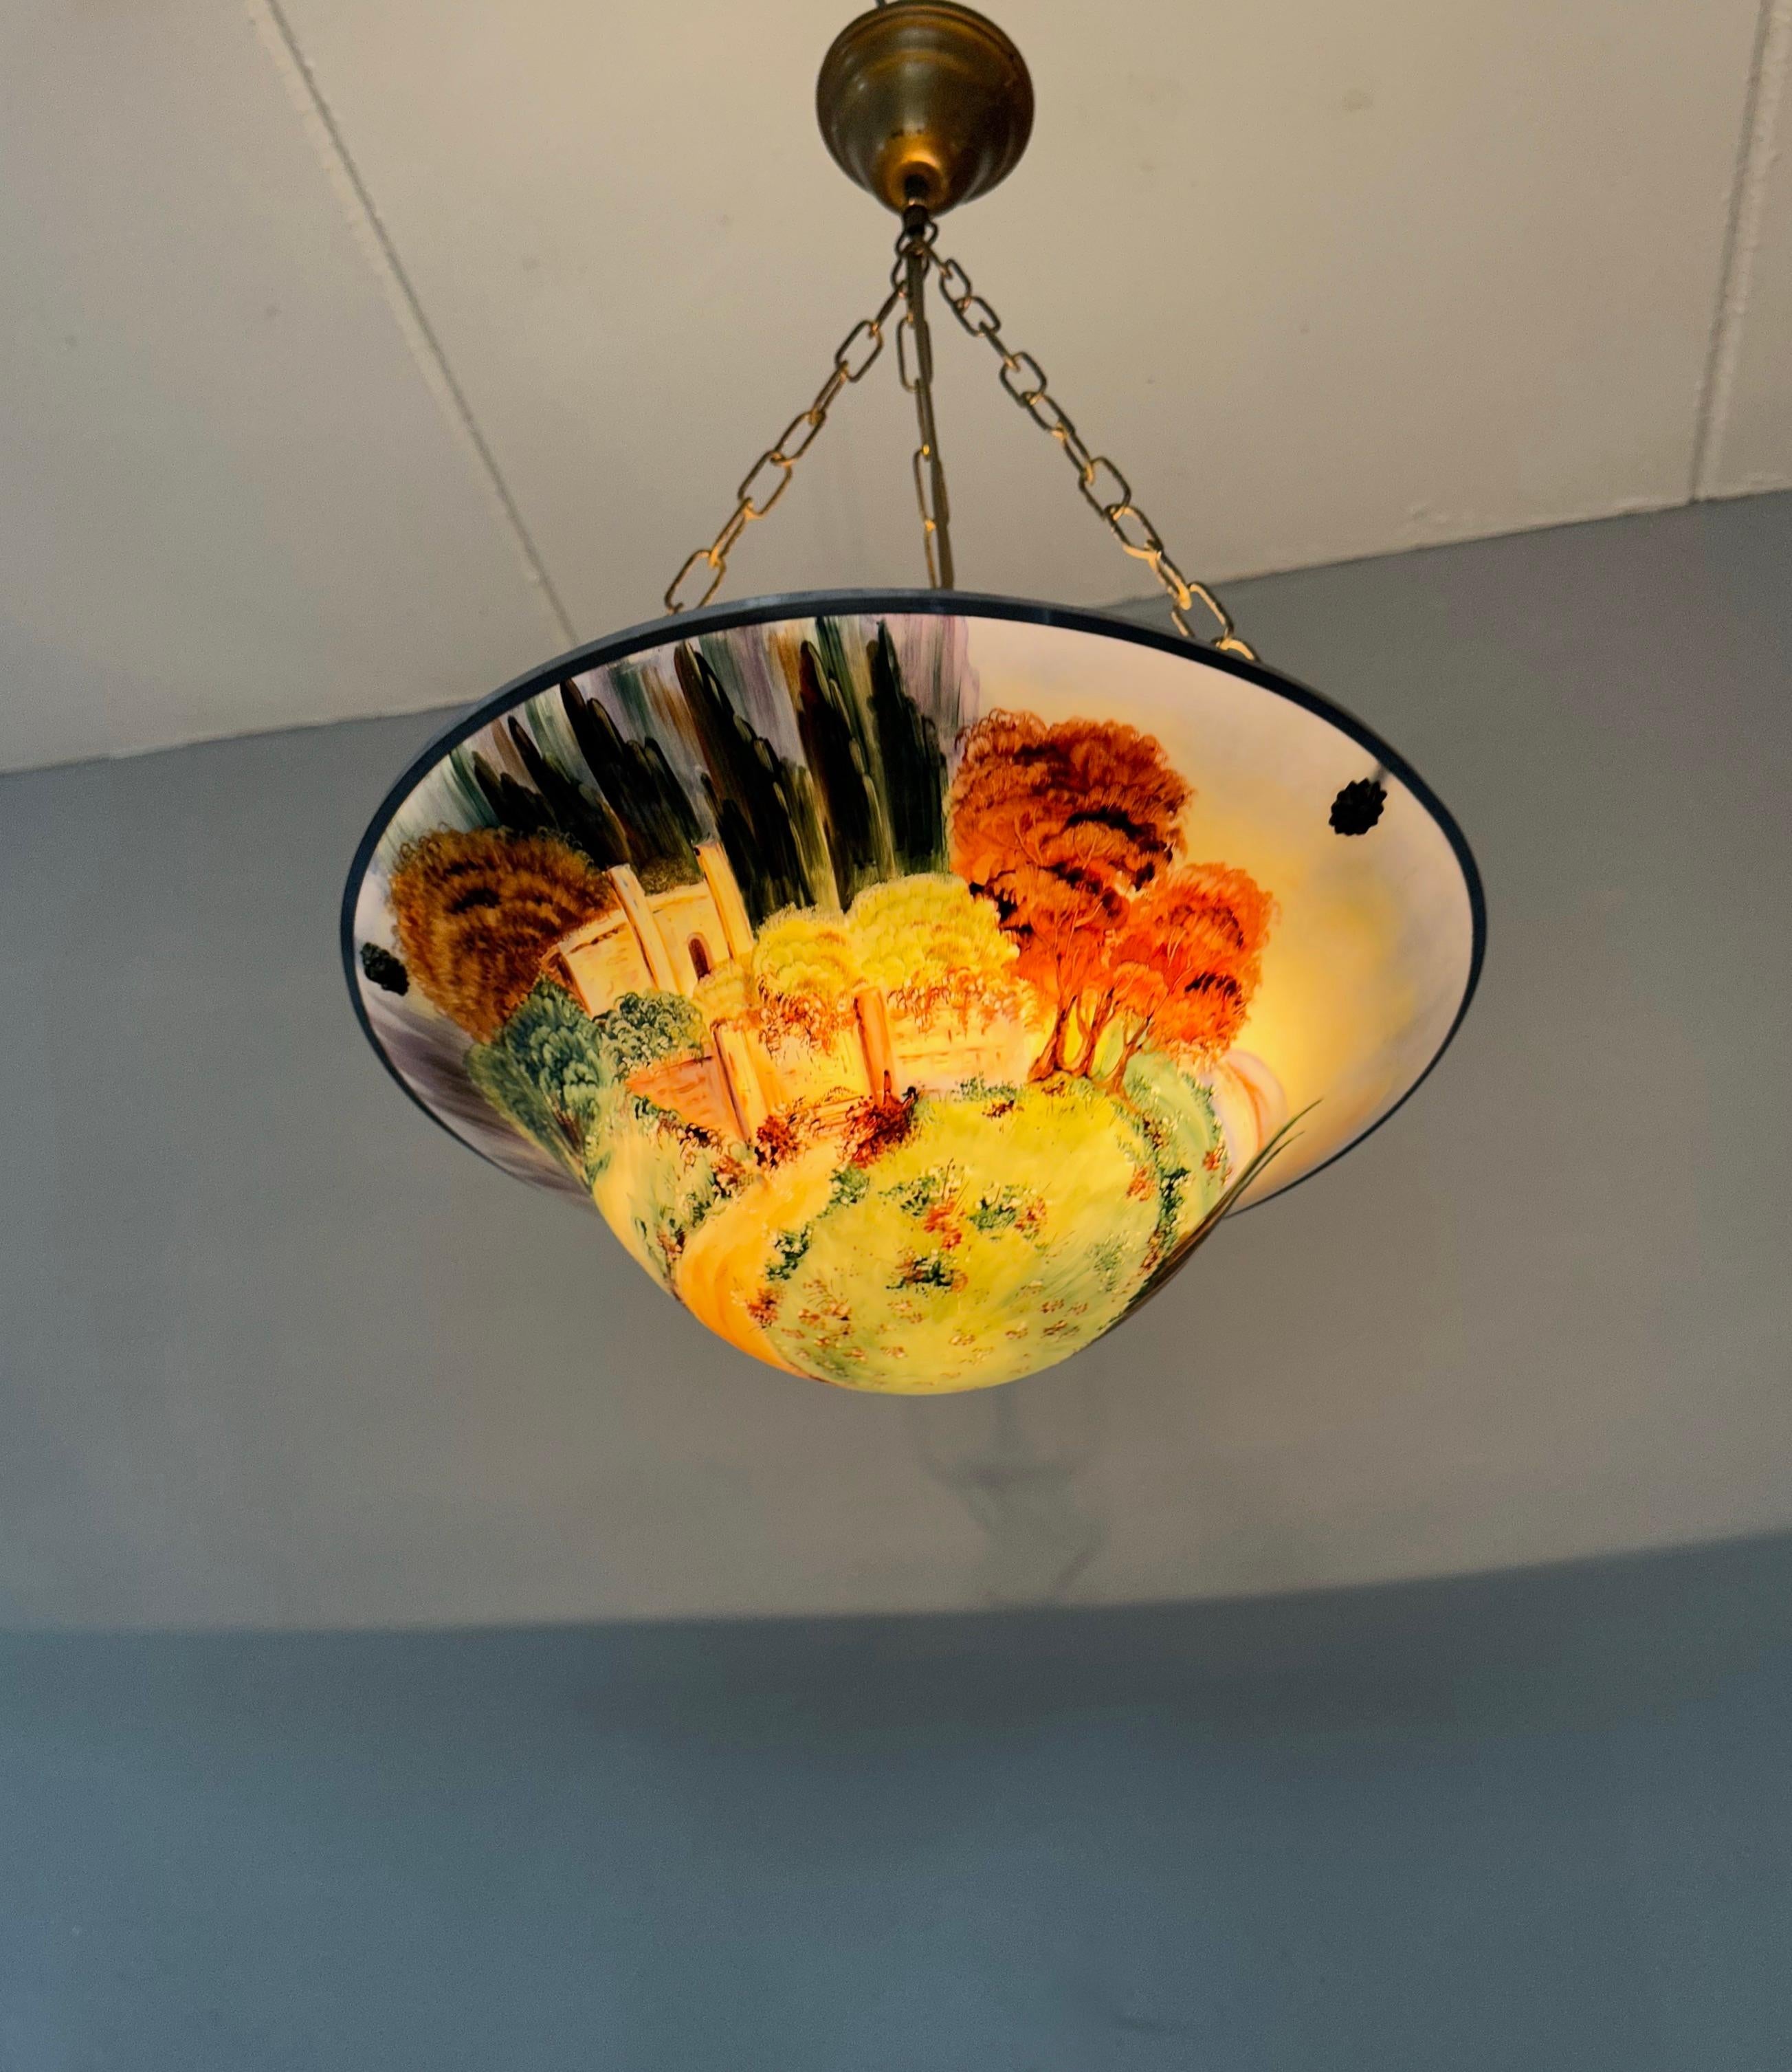 Antique 1920s Opaline Glass Shade with Hand Painted Landscape Pendant Light For Sale 2